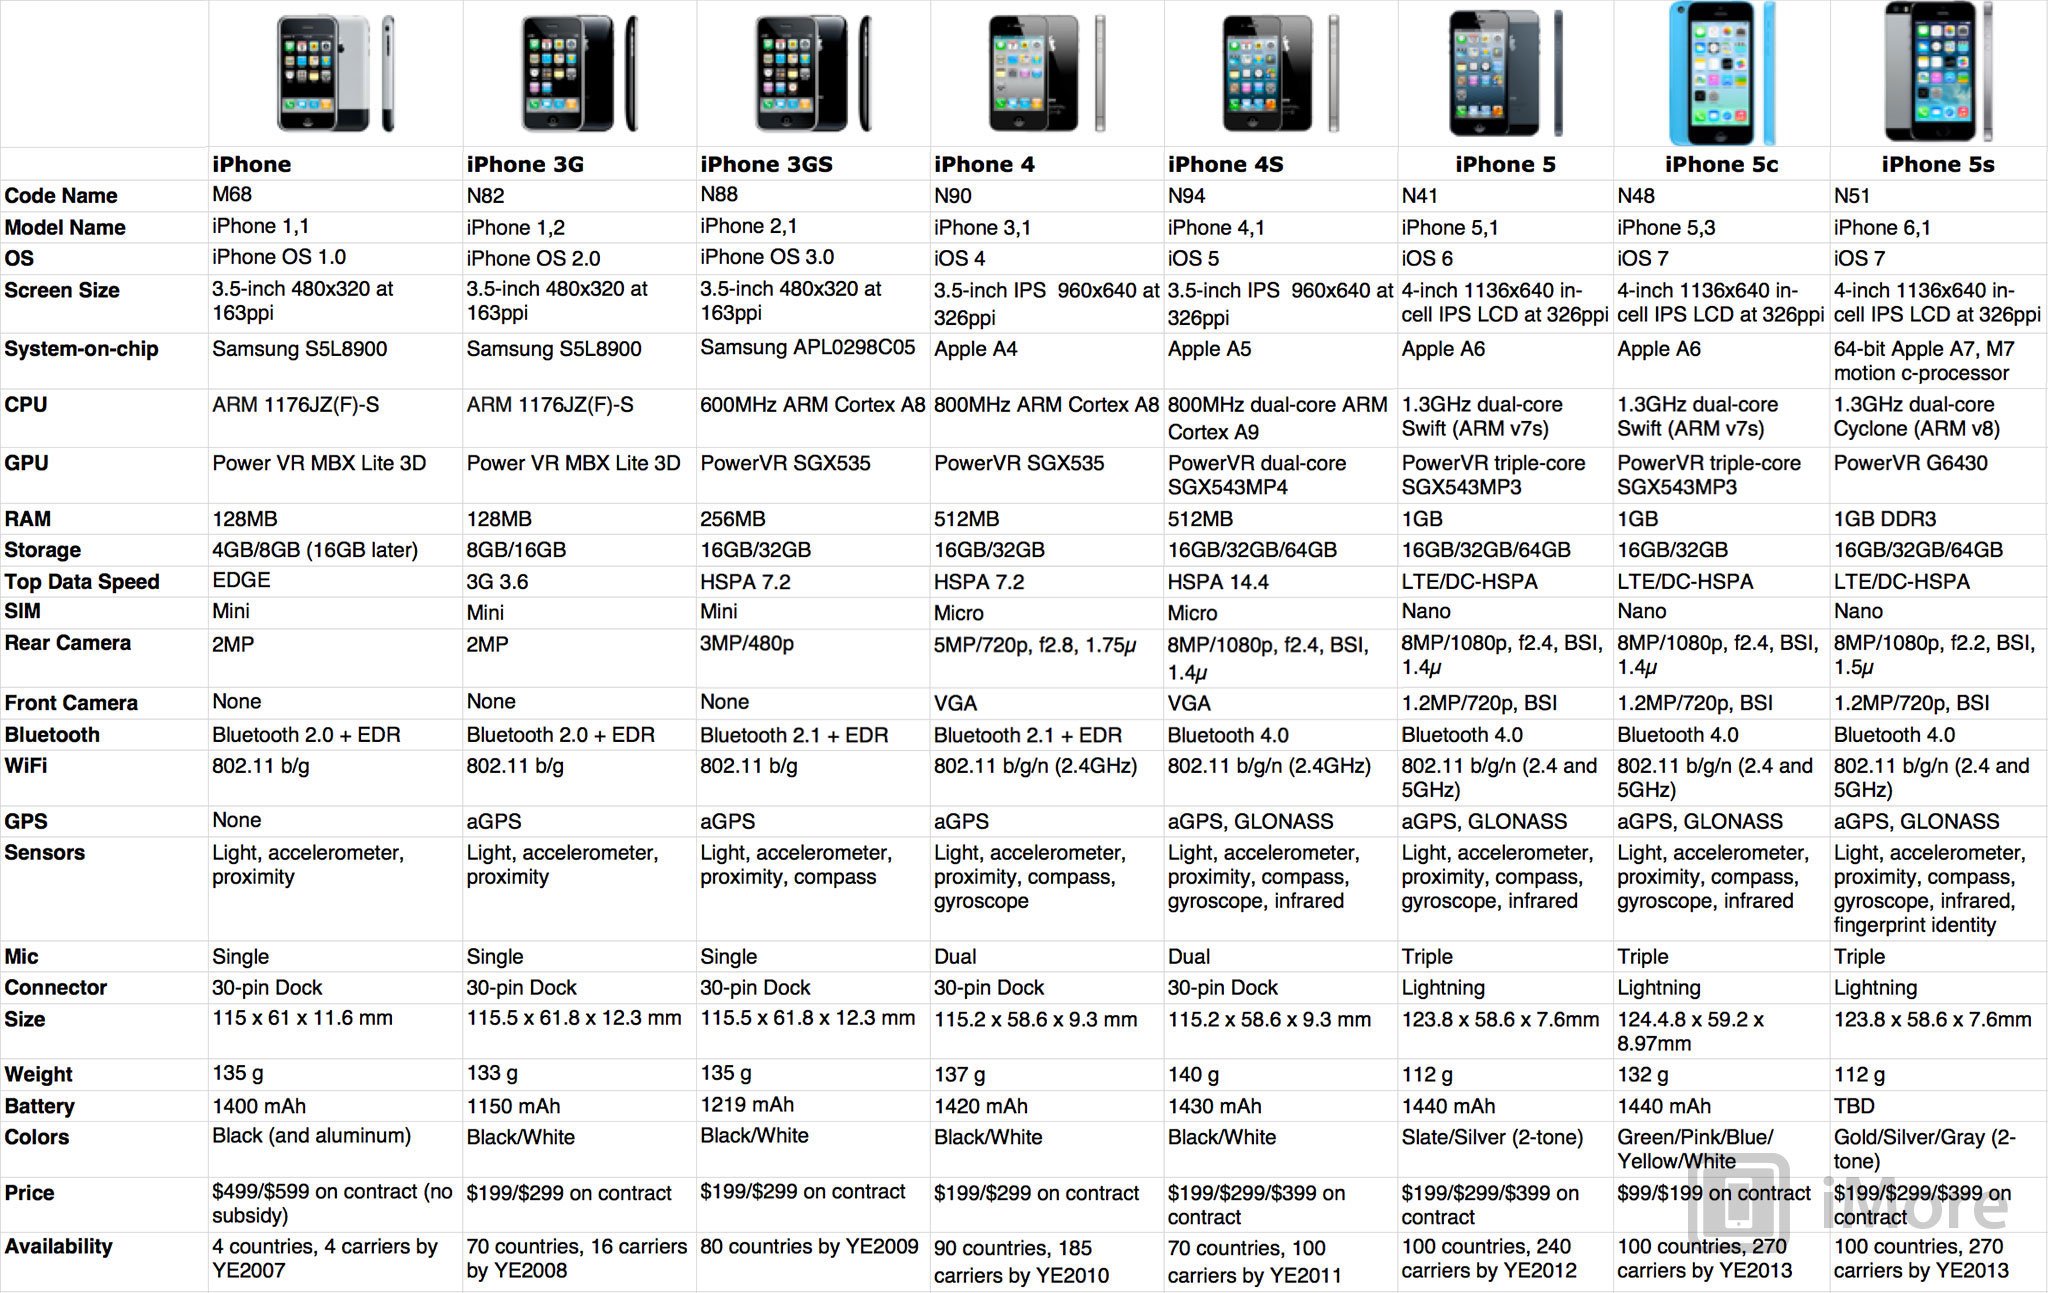 Chart of all iPhone models, including their specs